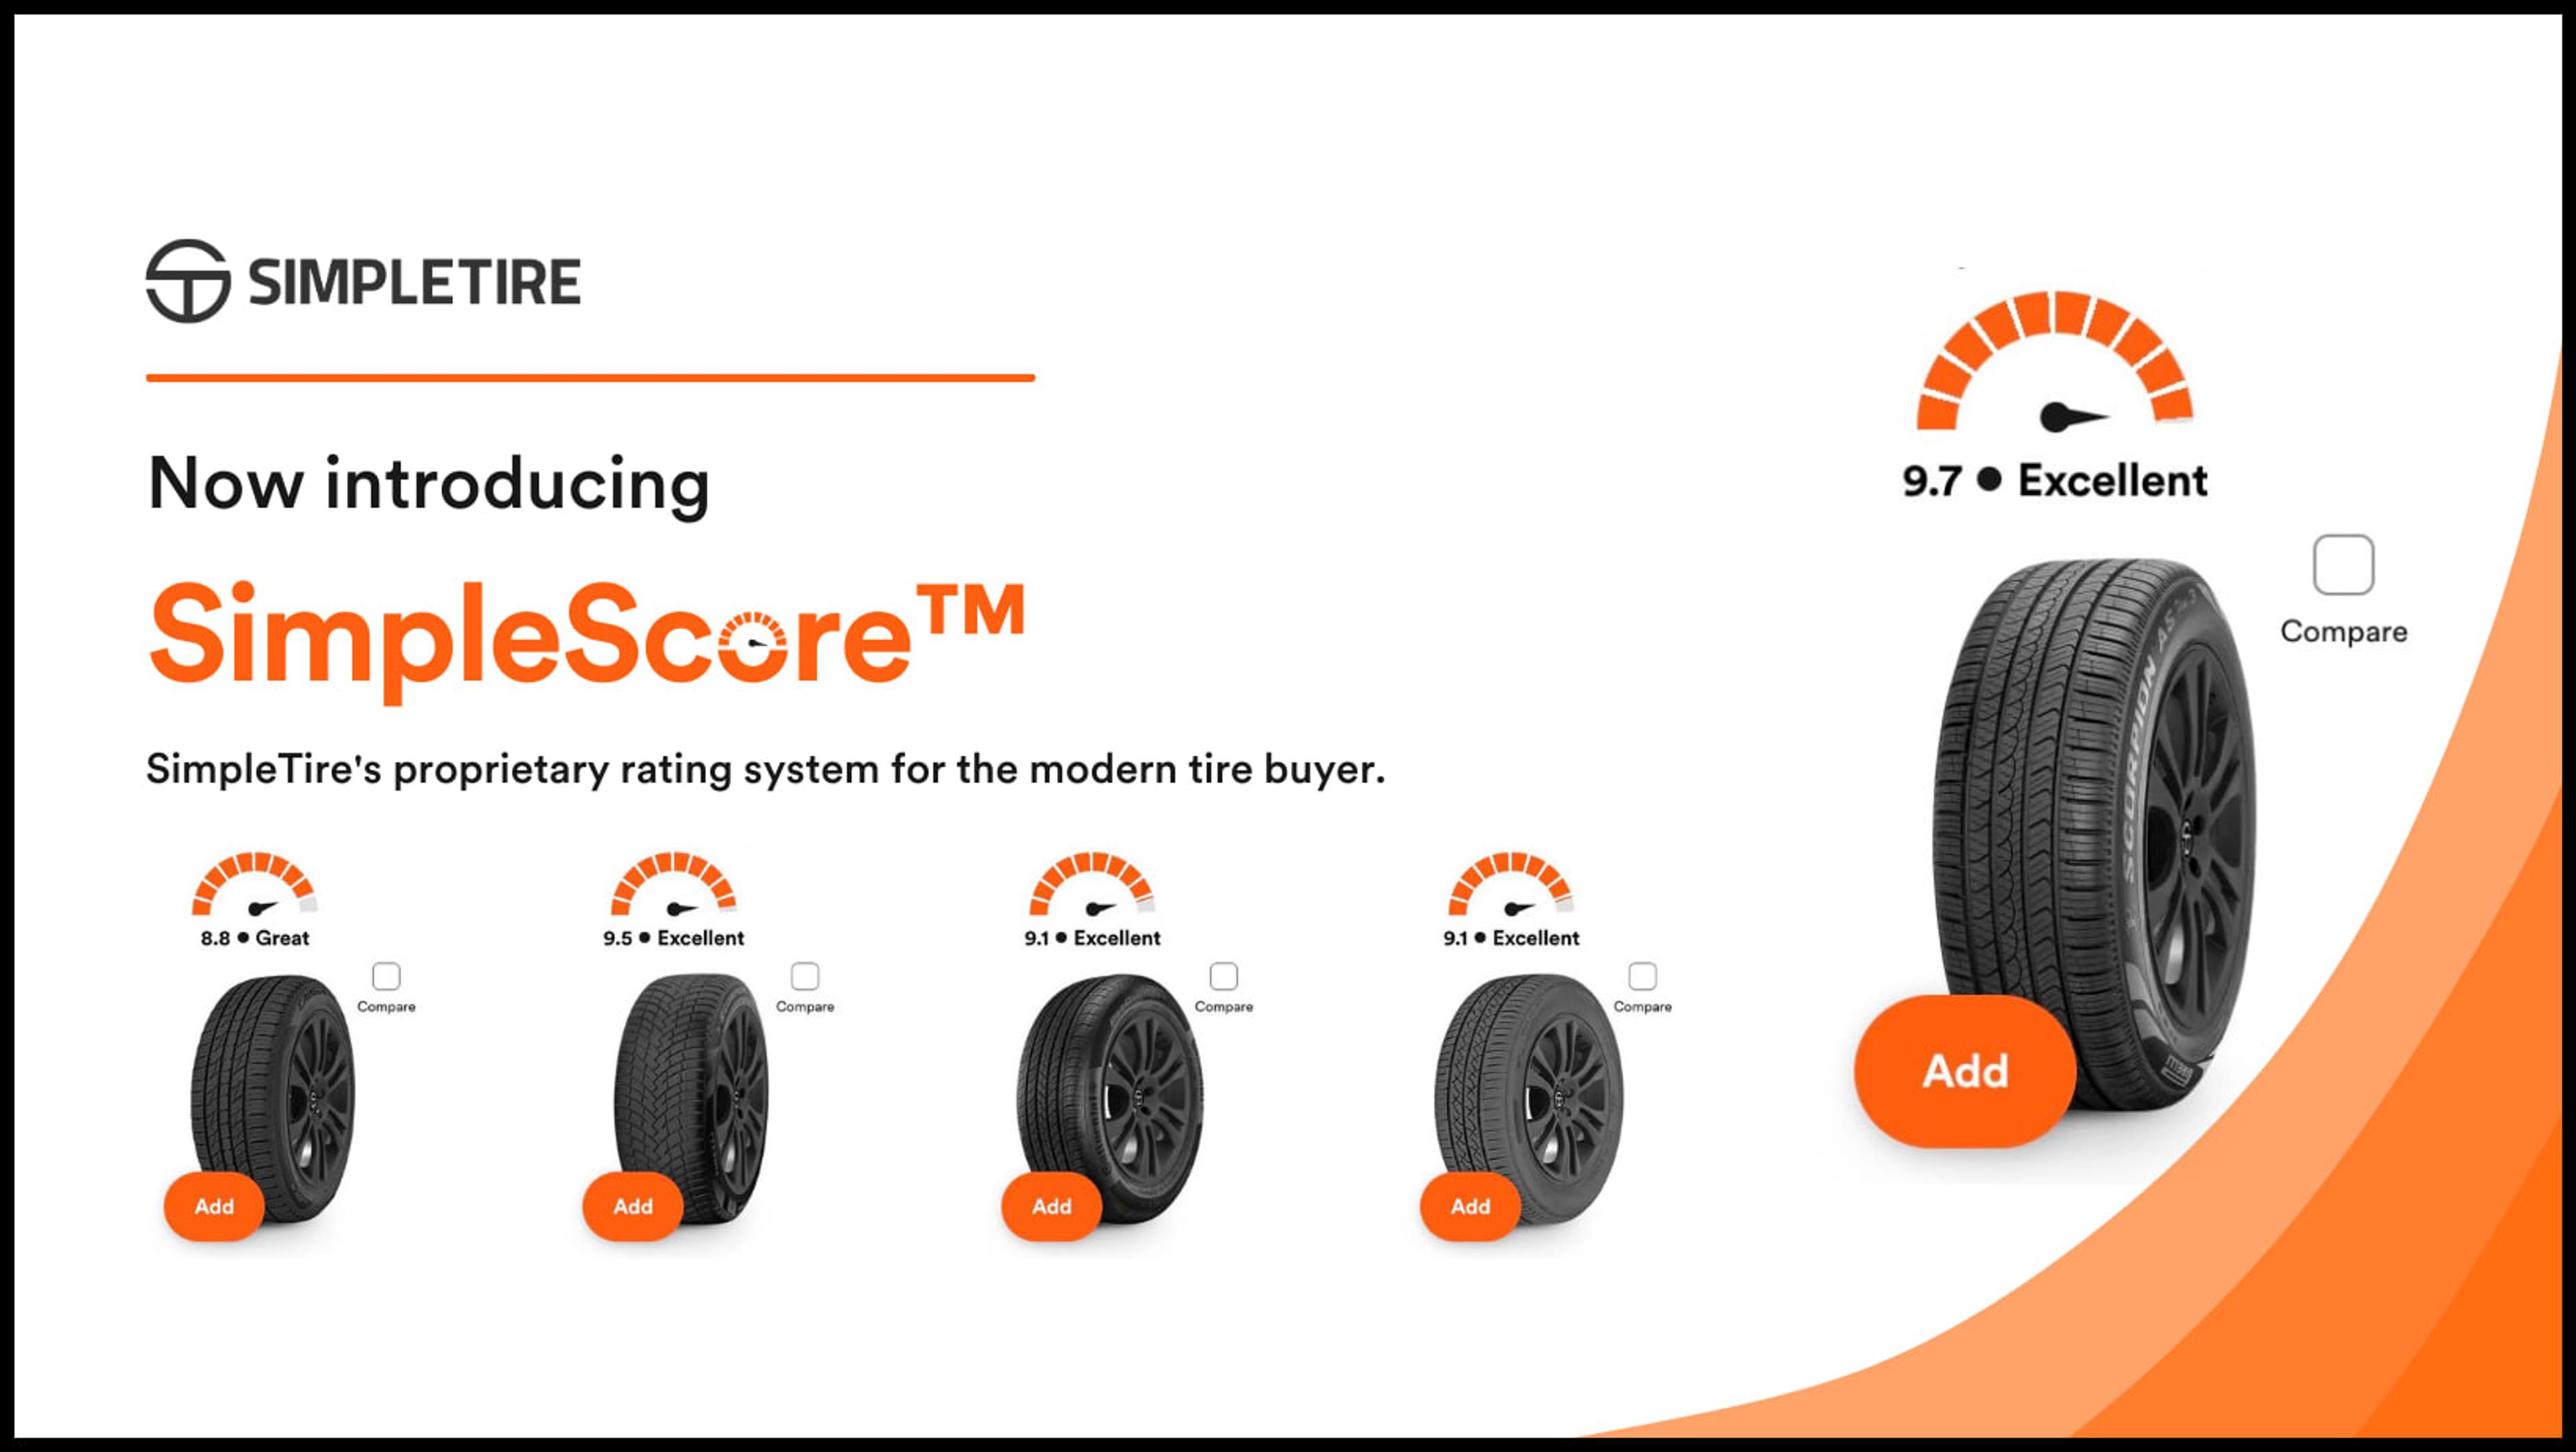 SimpleScore: Our proprietary rating system for the modern tire buyer